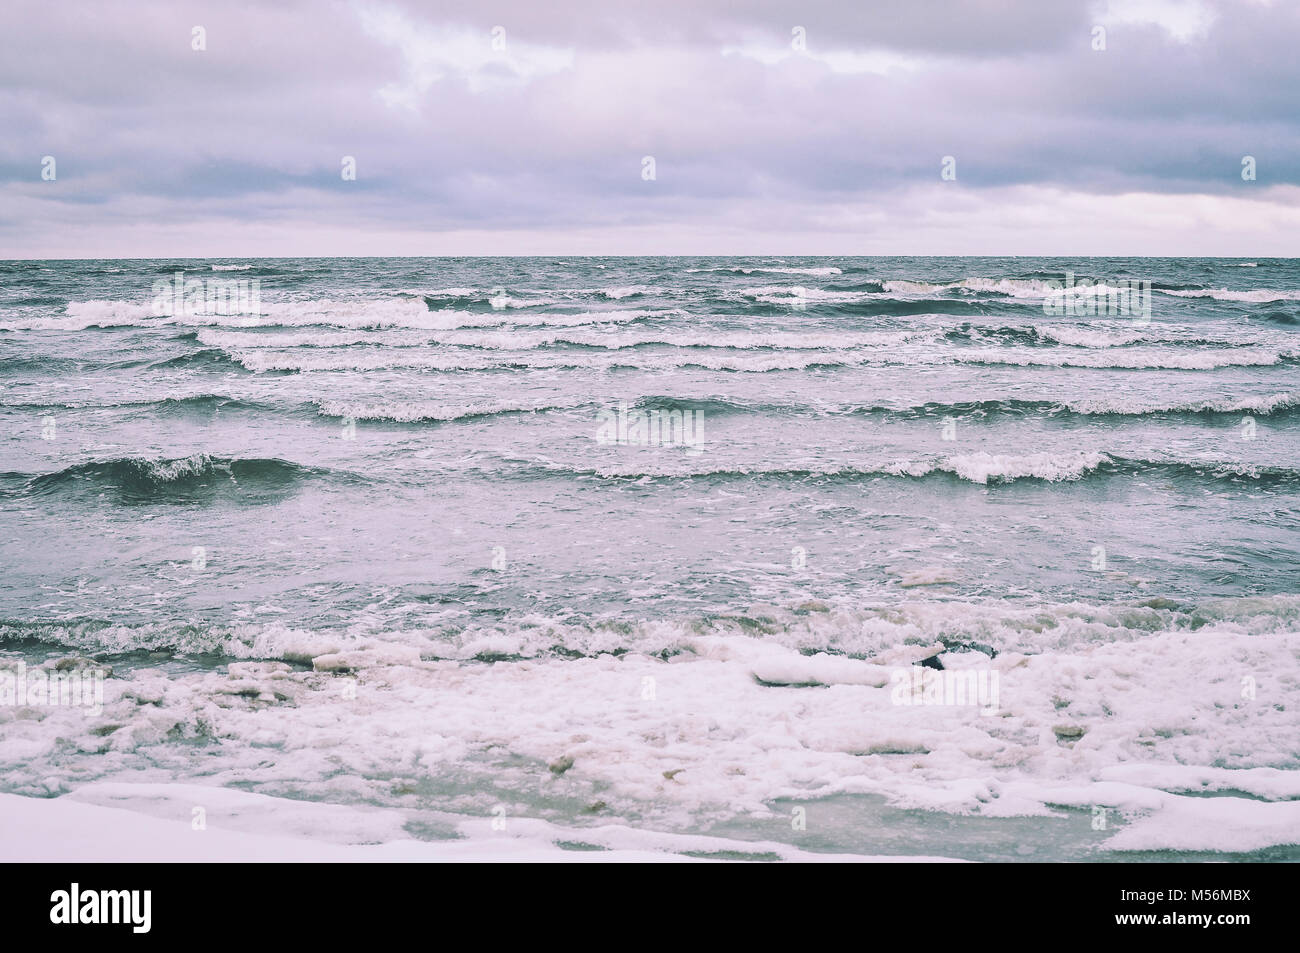 Baltic Sea in winter. Windy weather and waves. Stock Photo